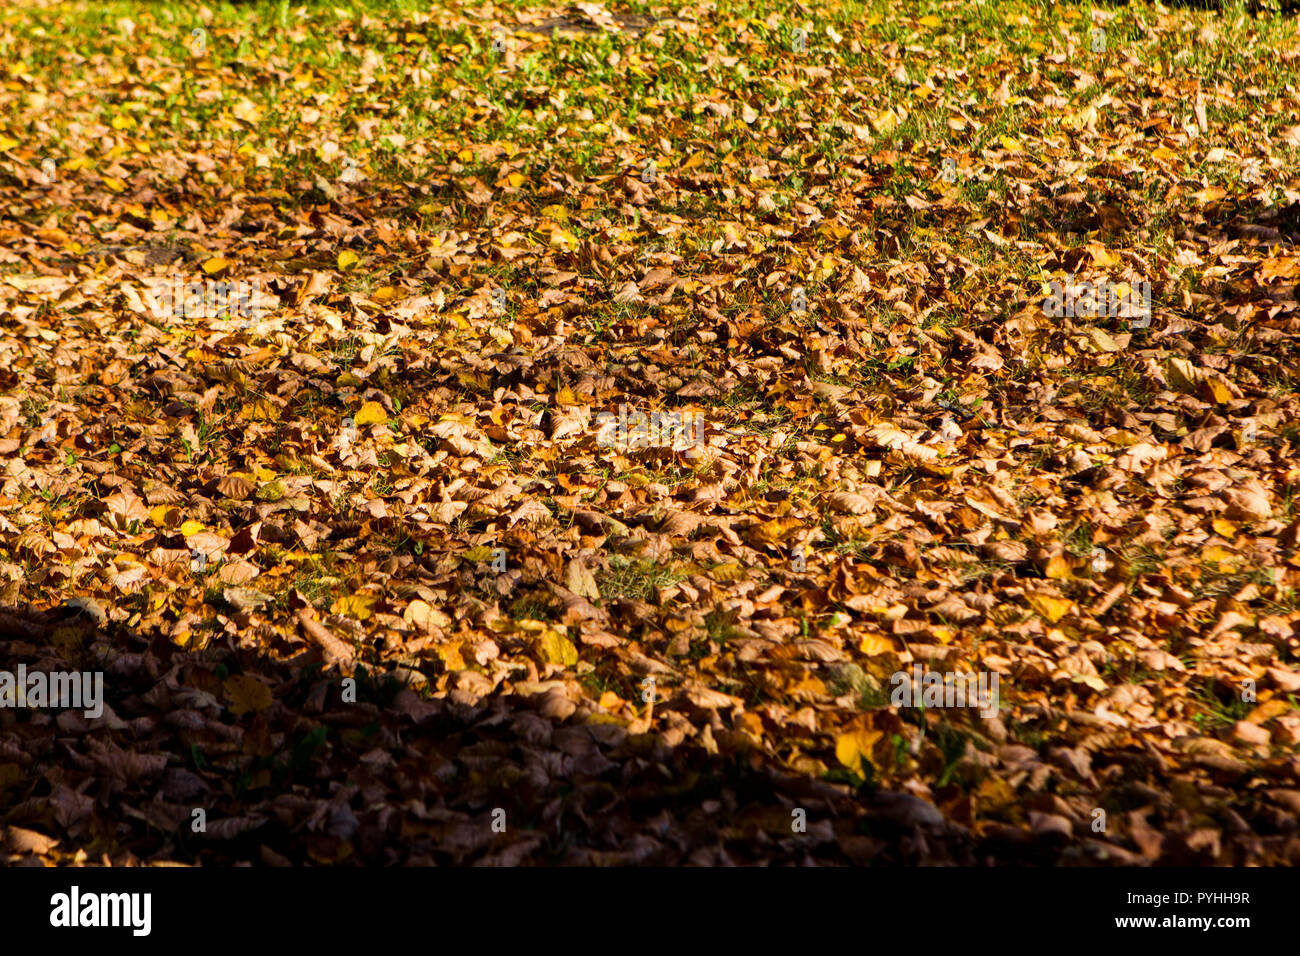 fallen dry leaves in the autumn park background Stock Photo